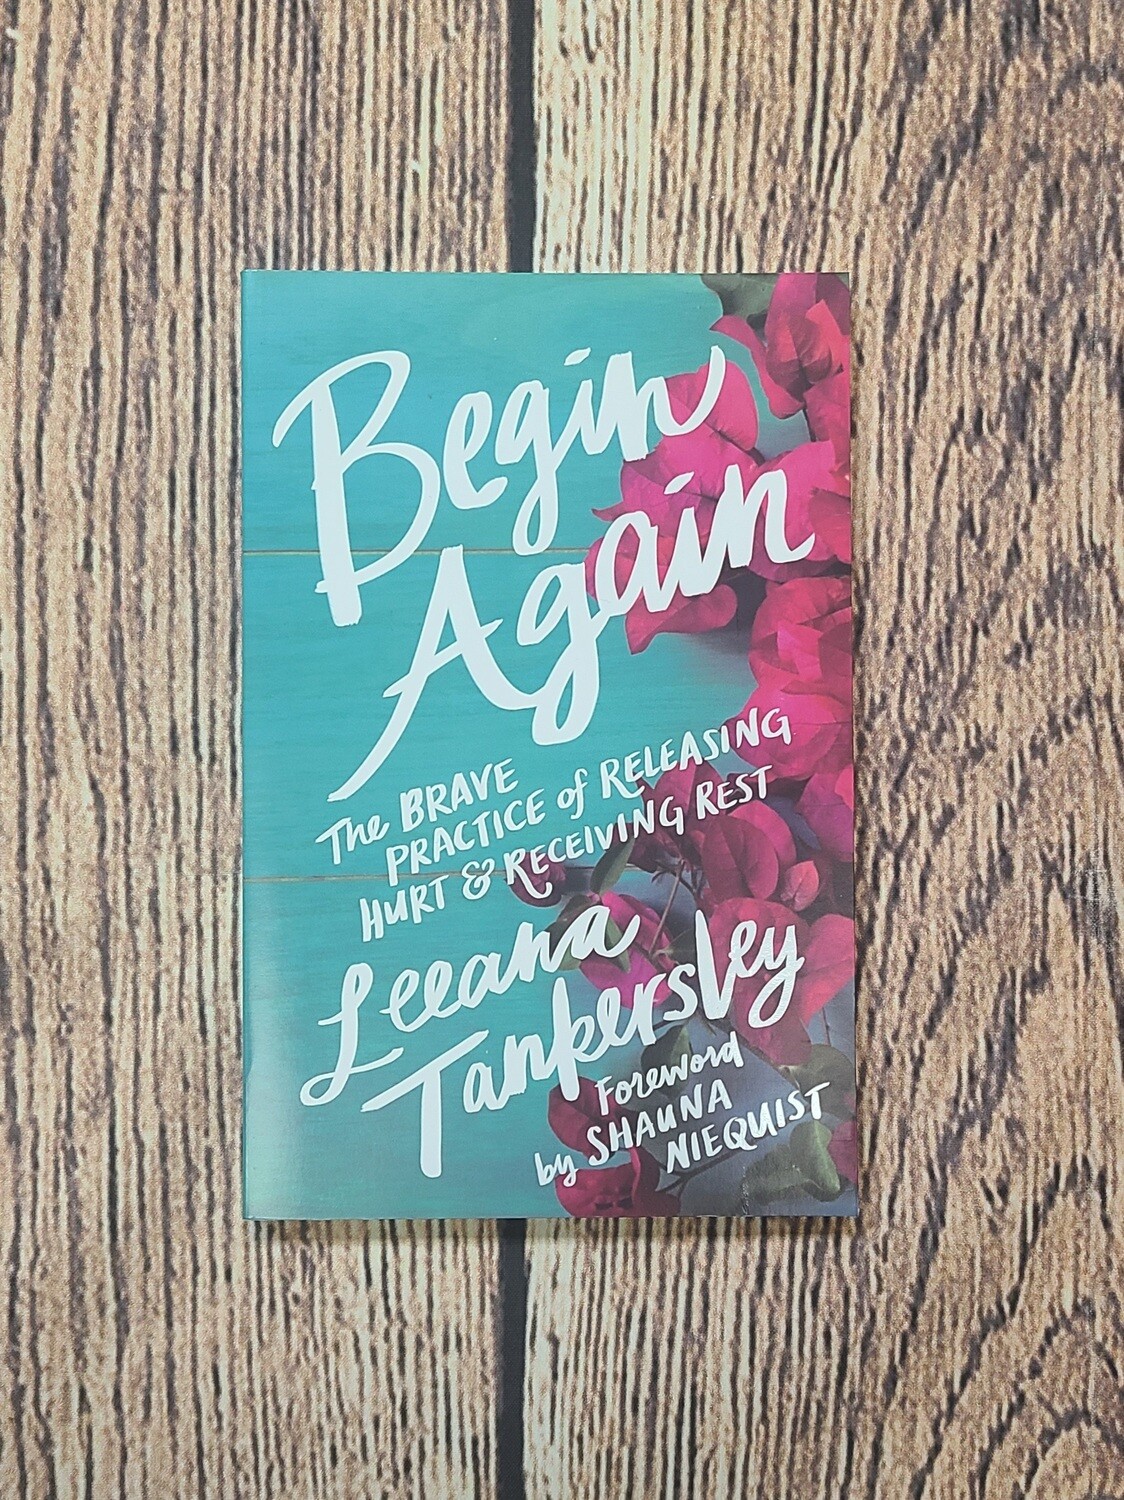 Begin Again: The Brace Practice of Releasing Hurt and Receiving Rest by Leeana Tankersley